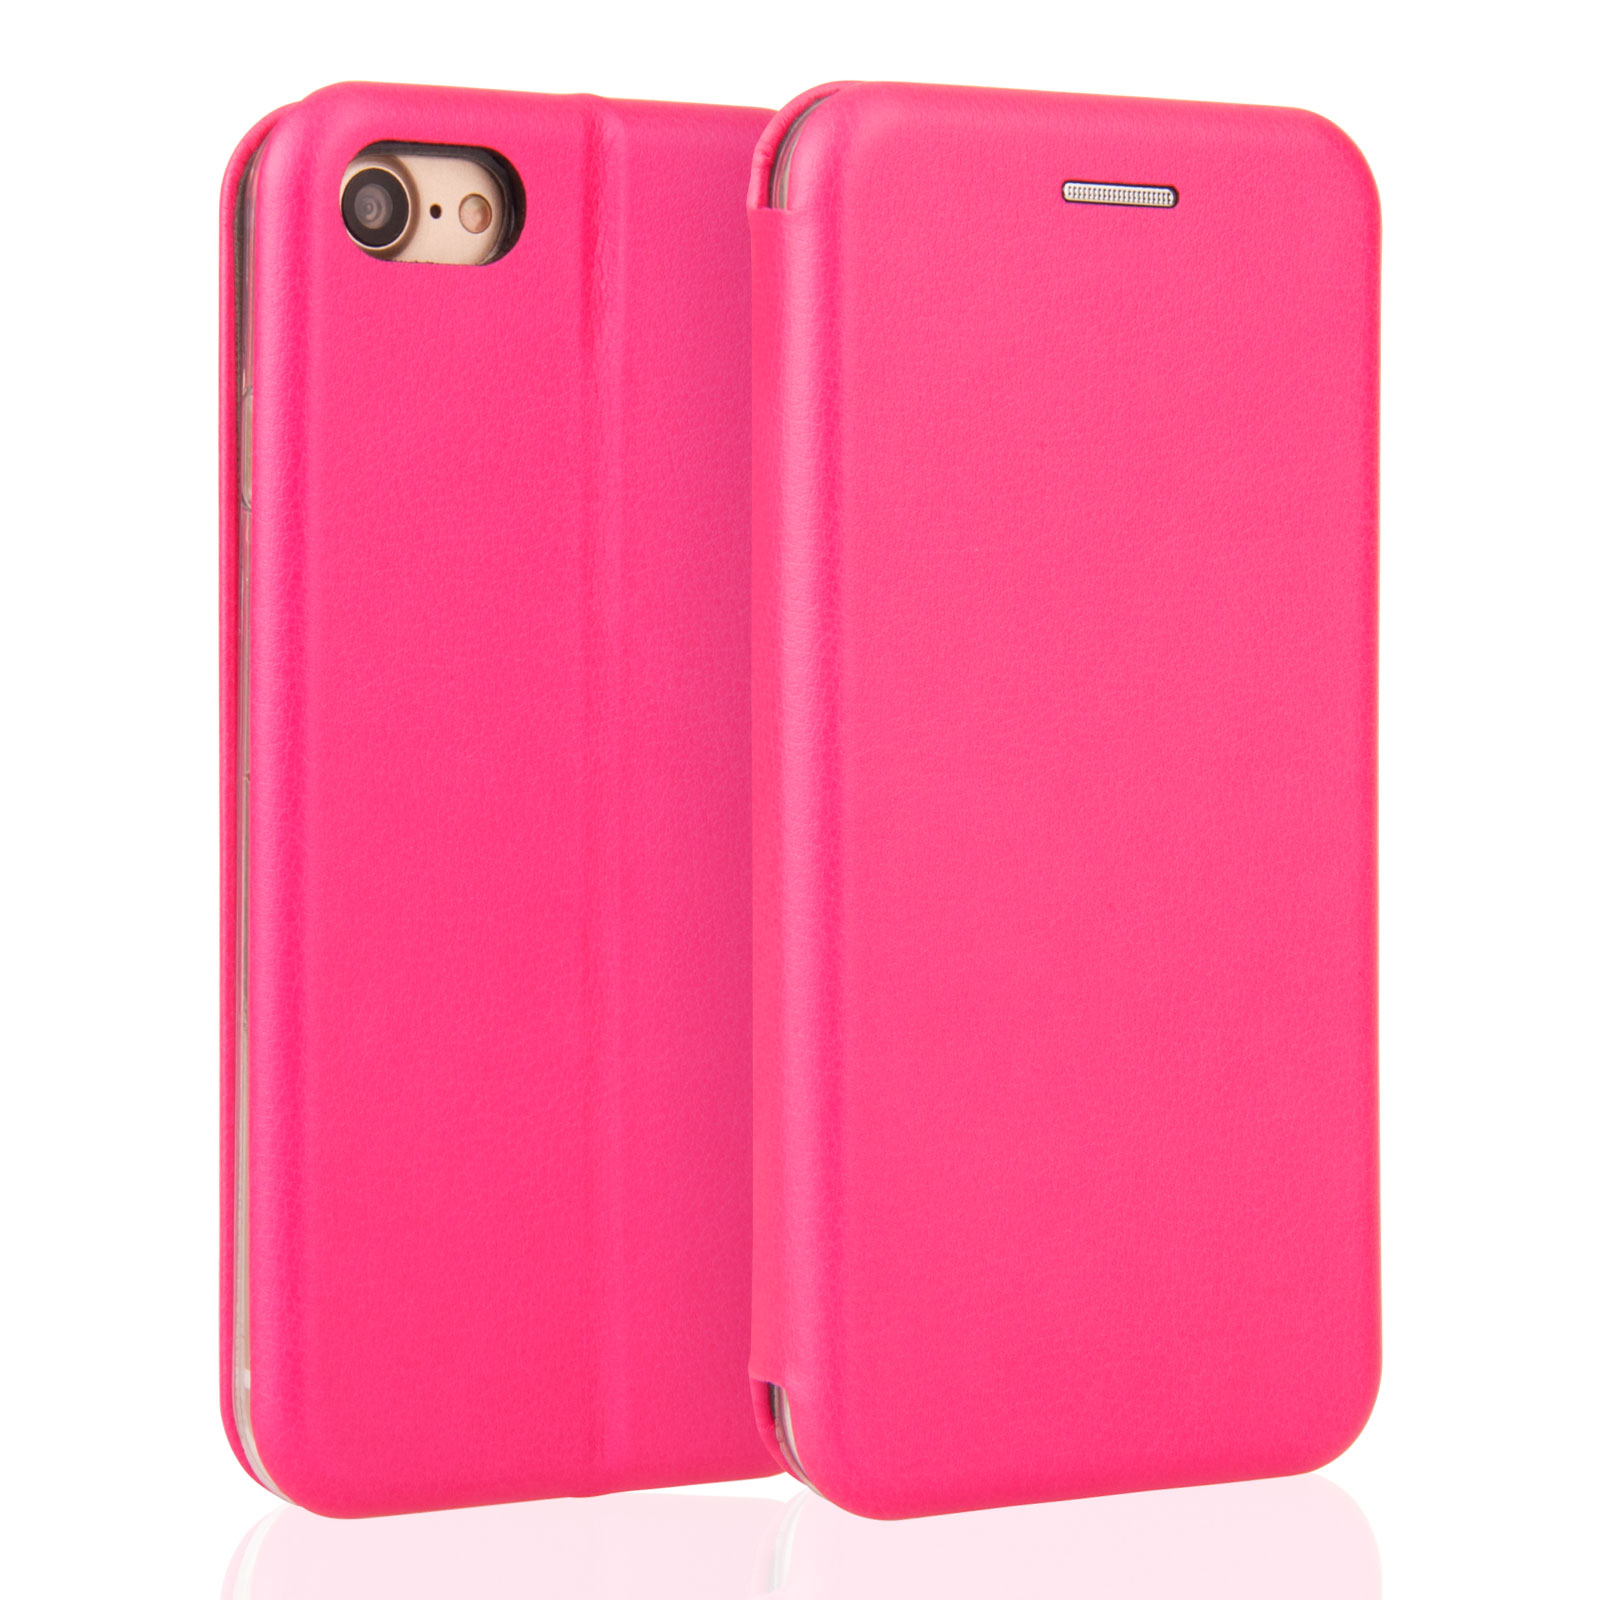 YouSave Accessories iPhone 7 Leather-Effect Stand Wallet Case - Pink